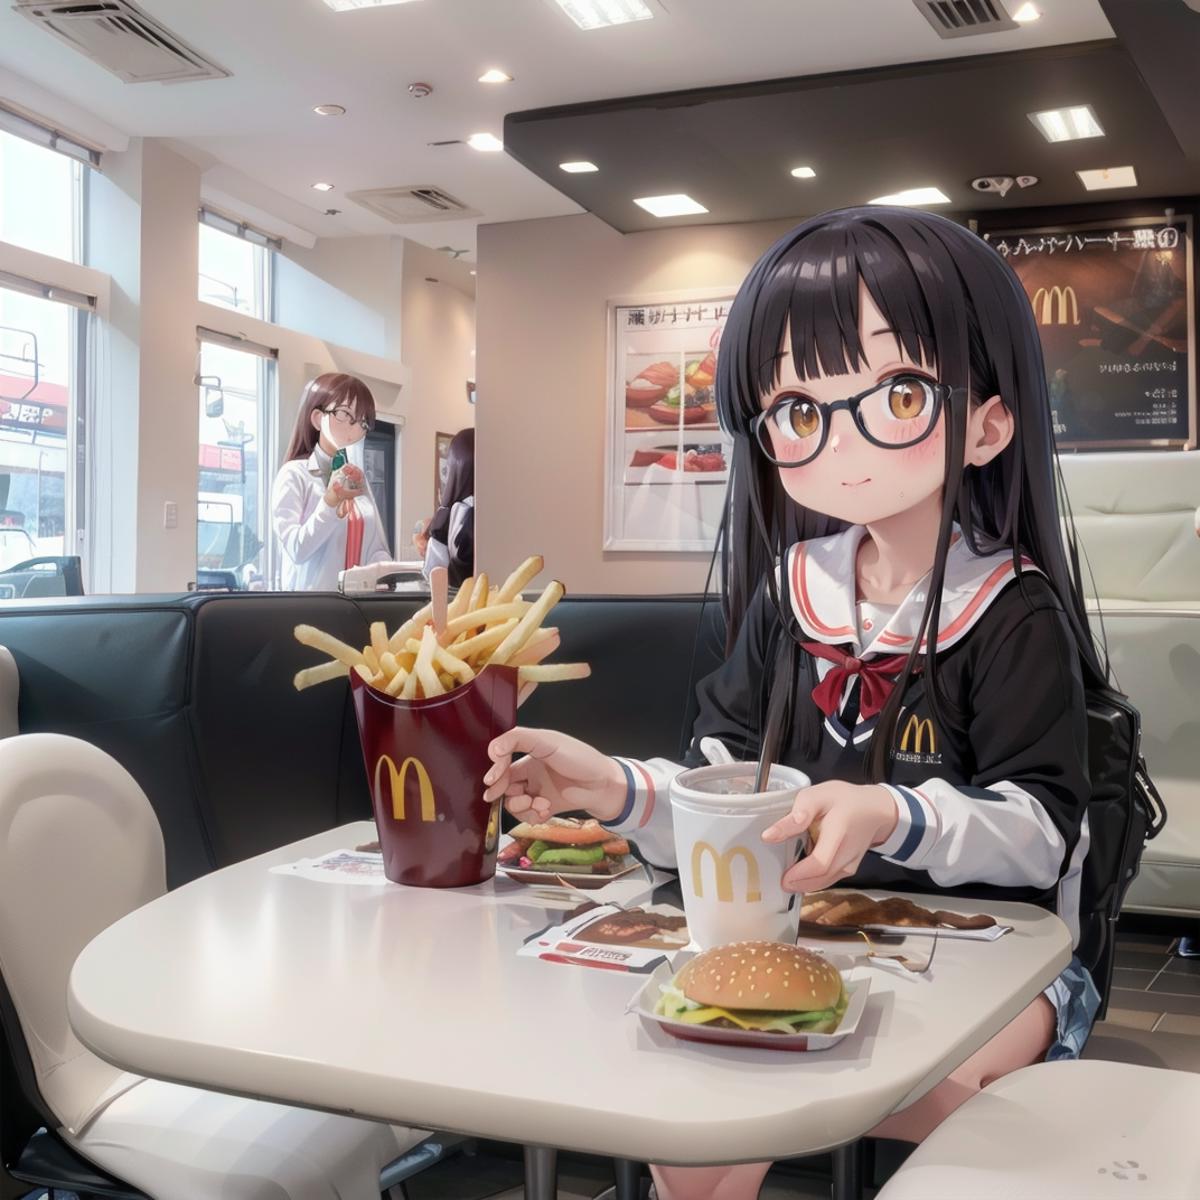 McDonald's JAPAN indoors SD15 image by swingwings